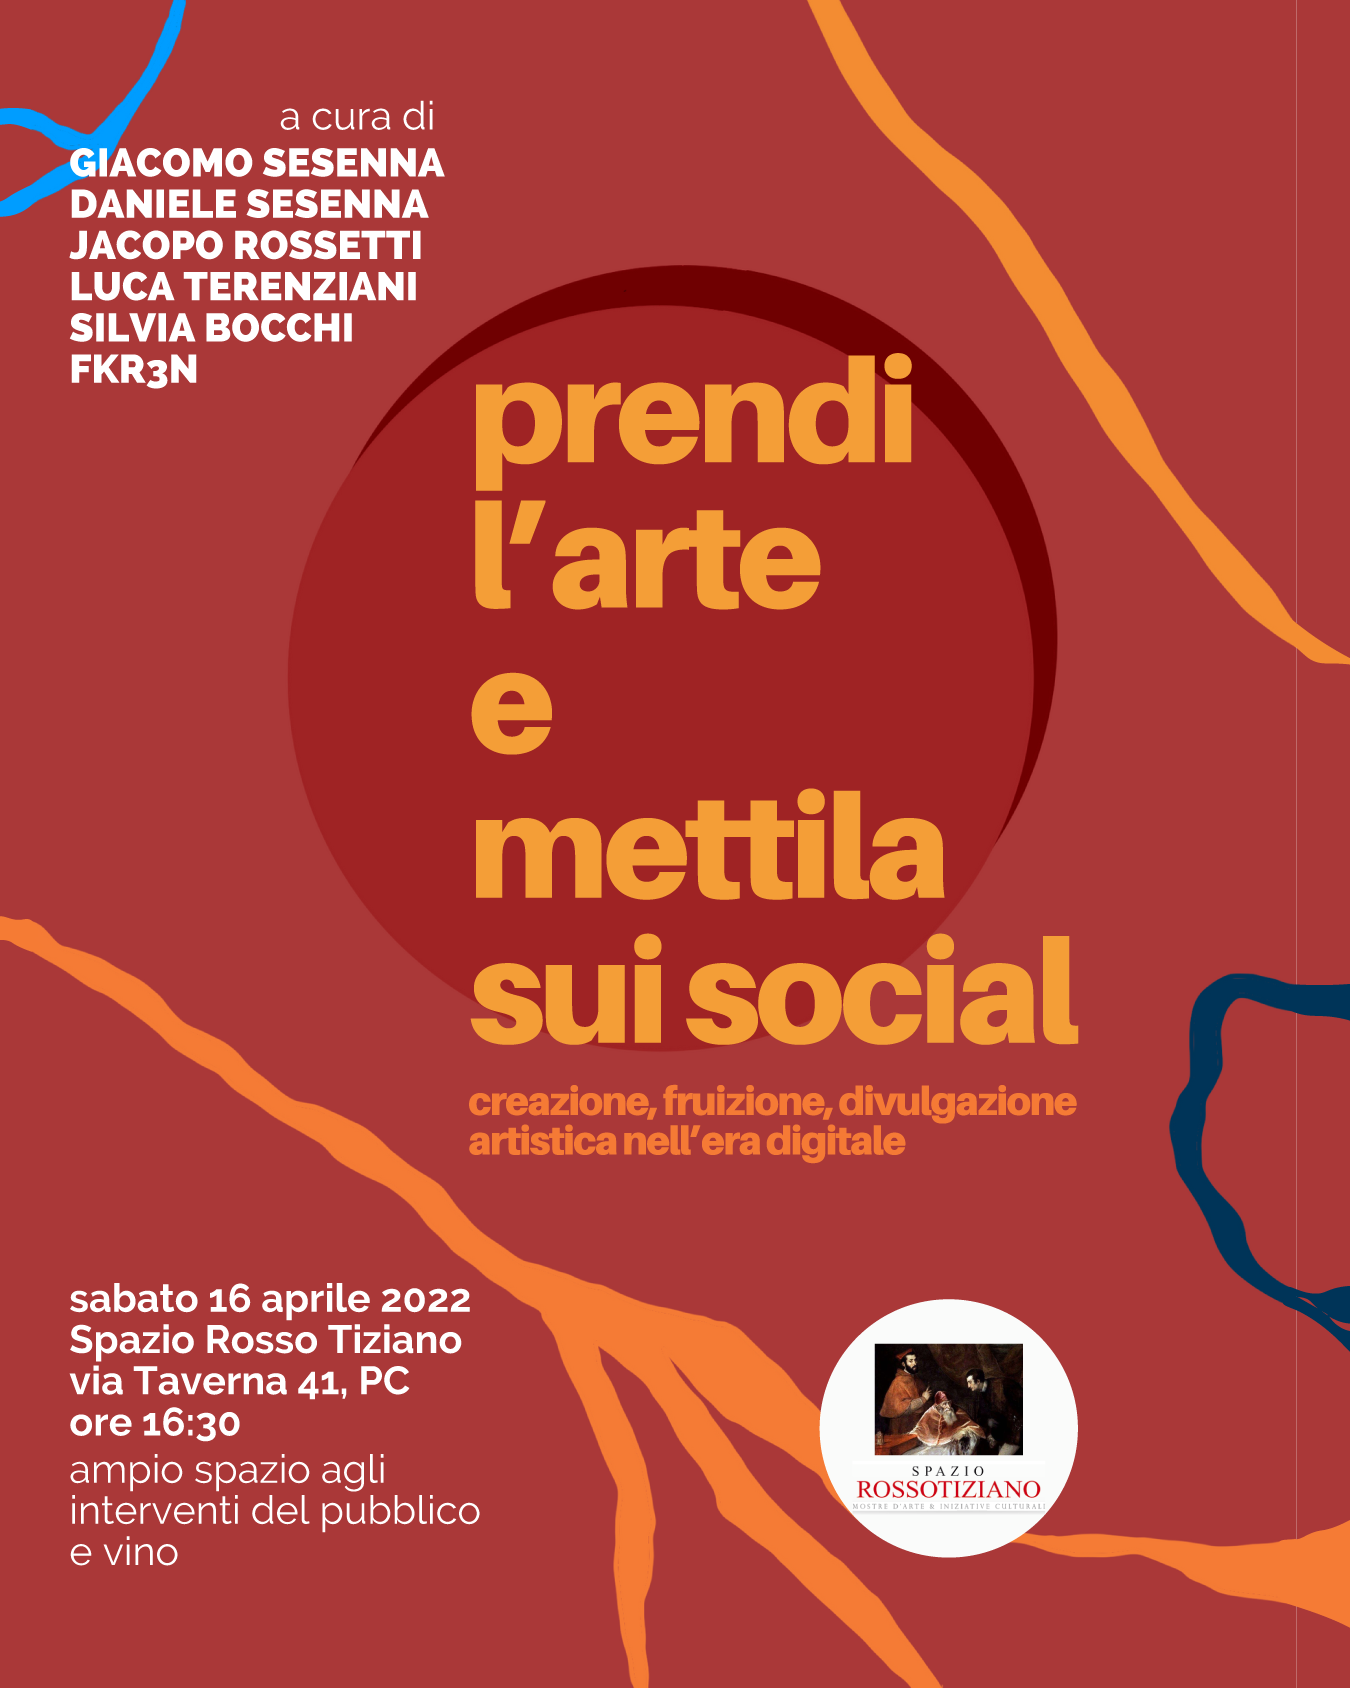 Get the art and put it on social media, on April 16th at Spazio Rosso Tiziano